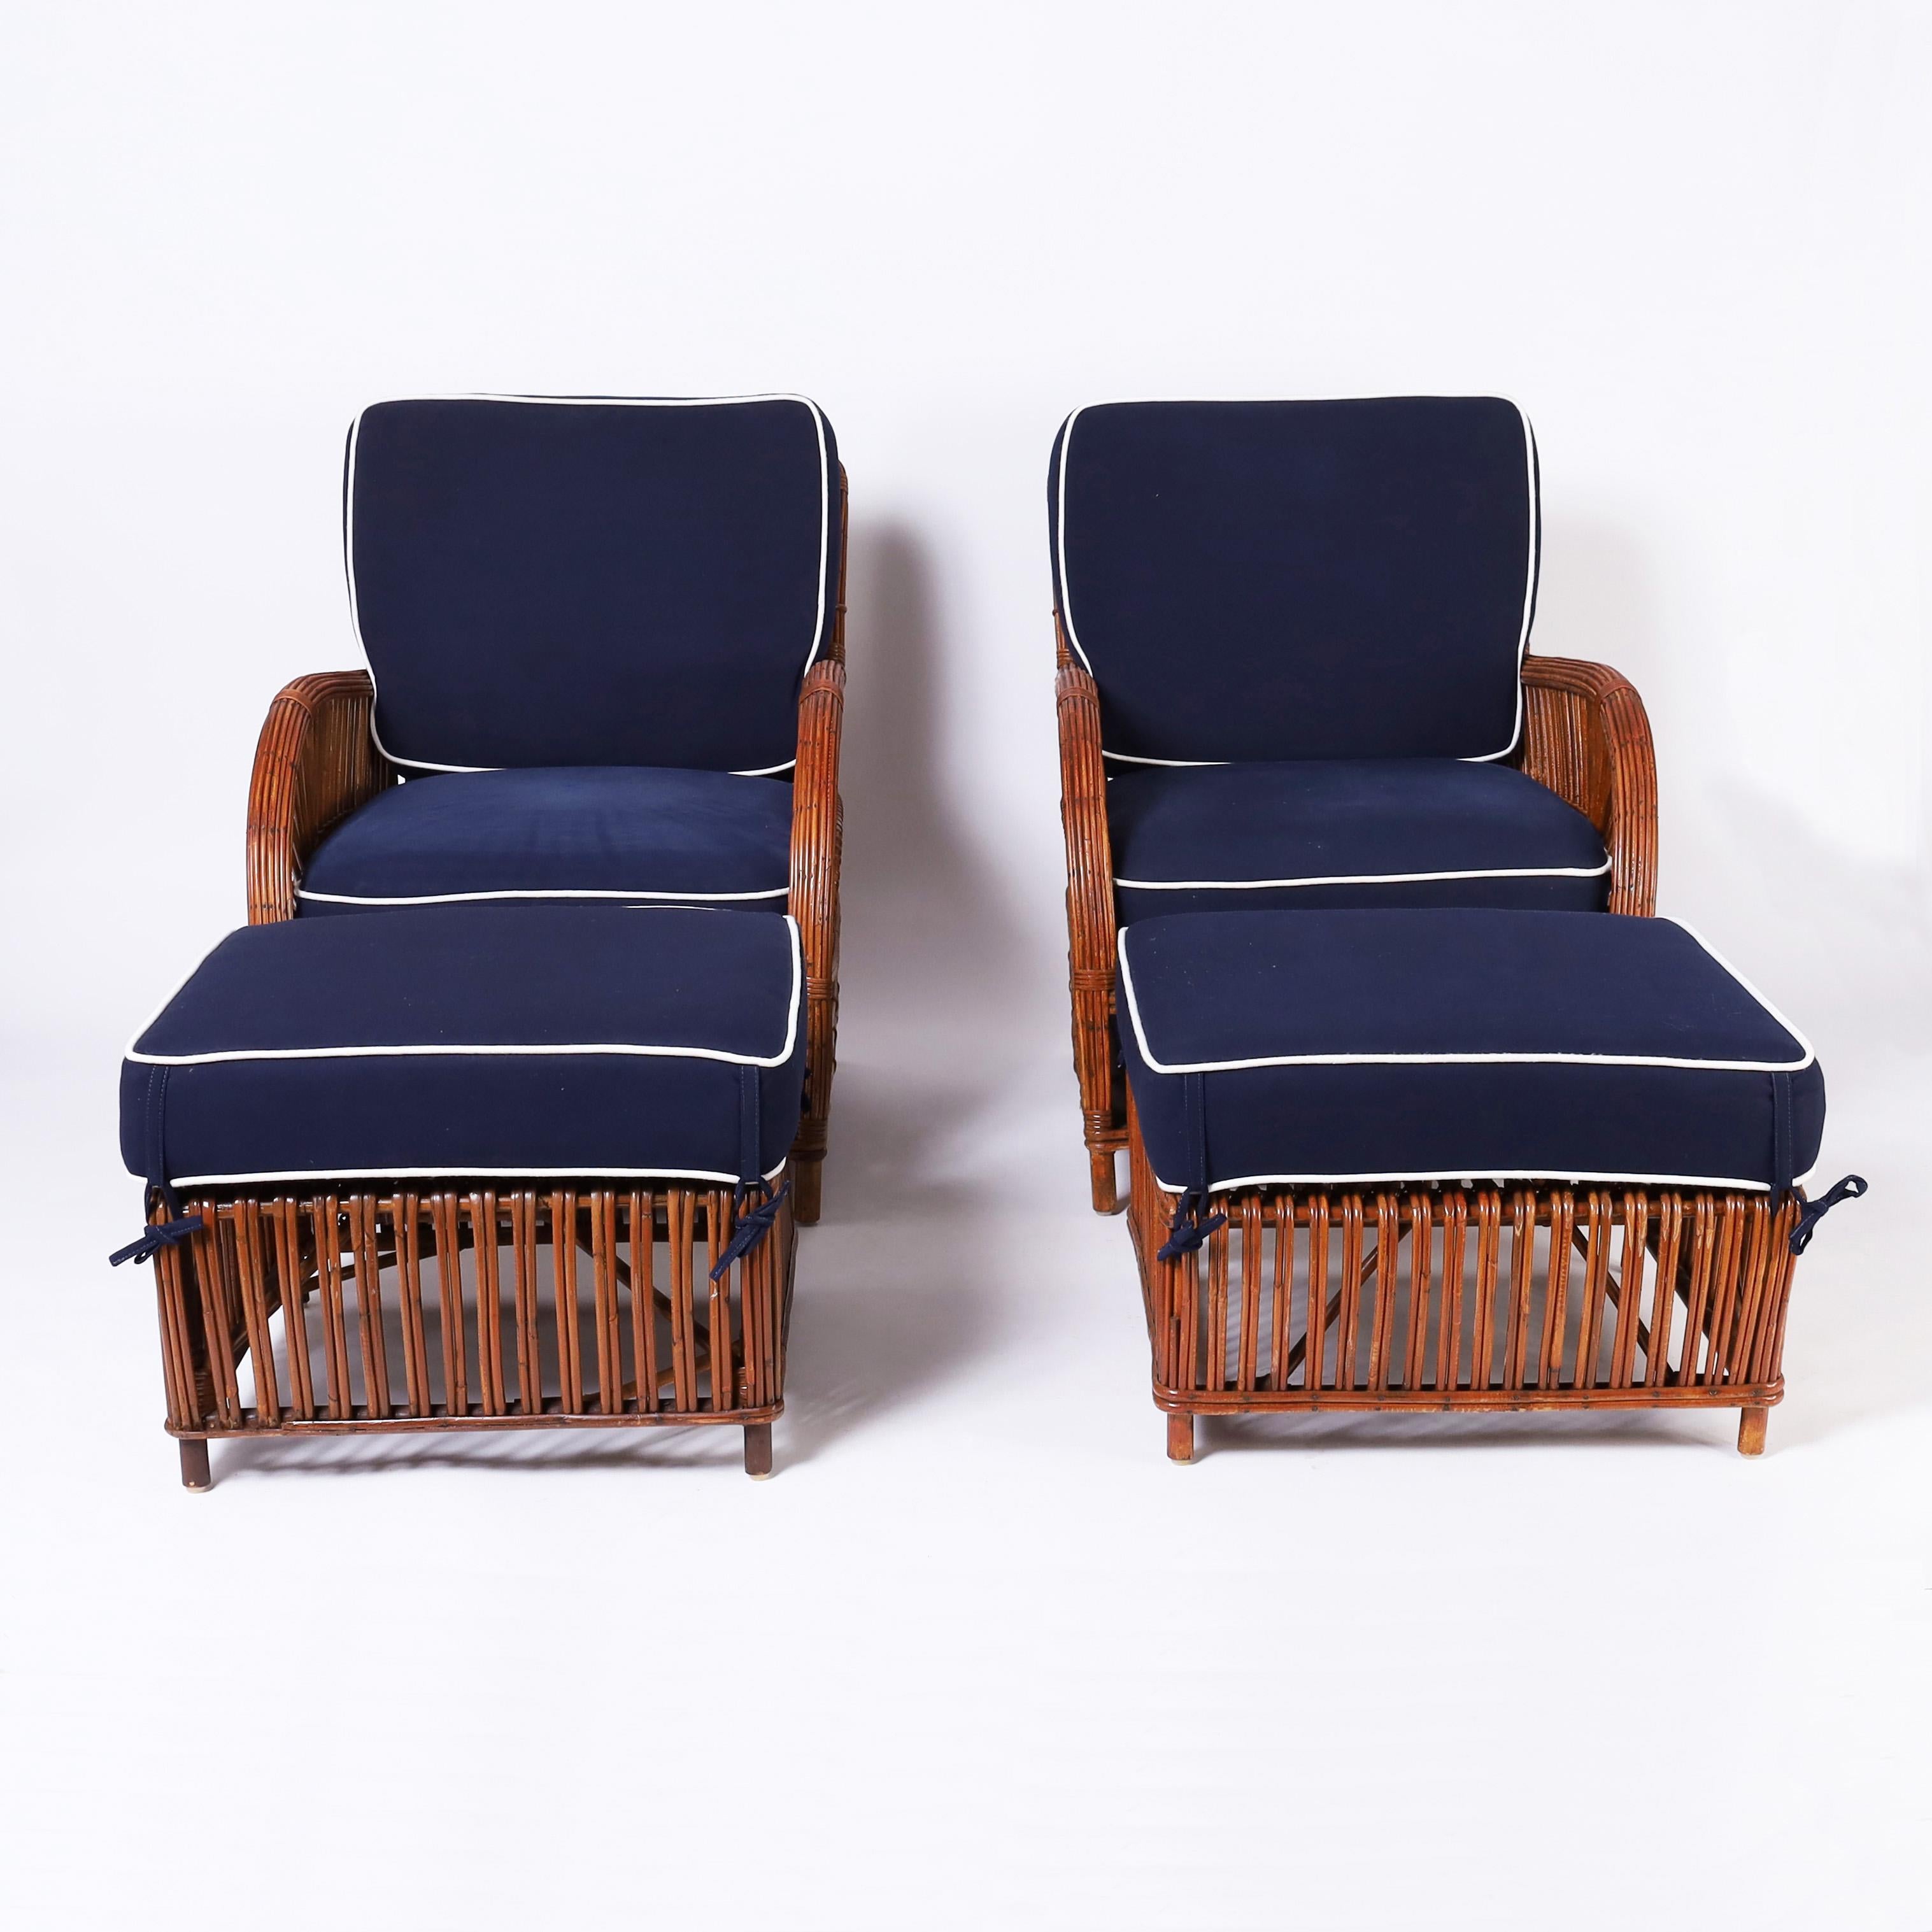 Like something out of a 1930s movie, a pair of rattan art deco lounge chairs having a streamline form with matching ottomans all dressed in blue and white upholstery. 

Chairs measure H: 31 W: 27 D: 37 

Seat height with cushion 16